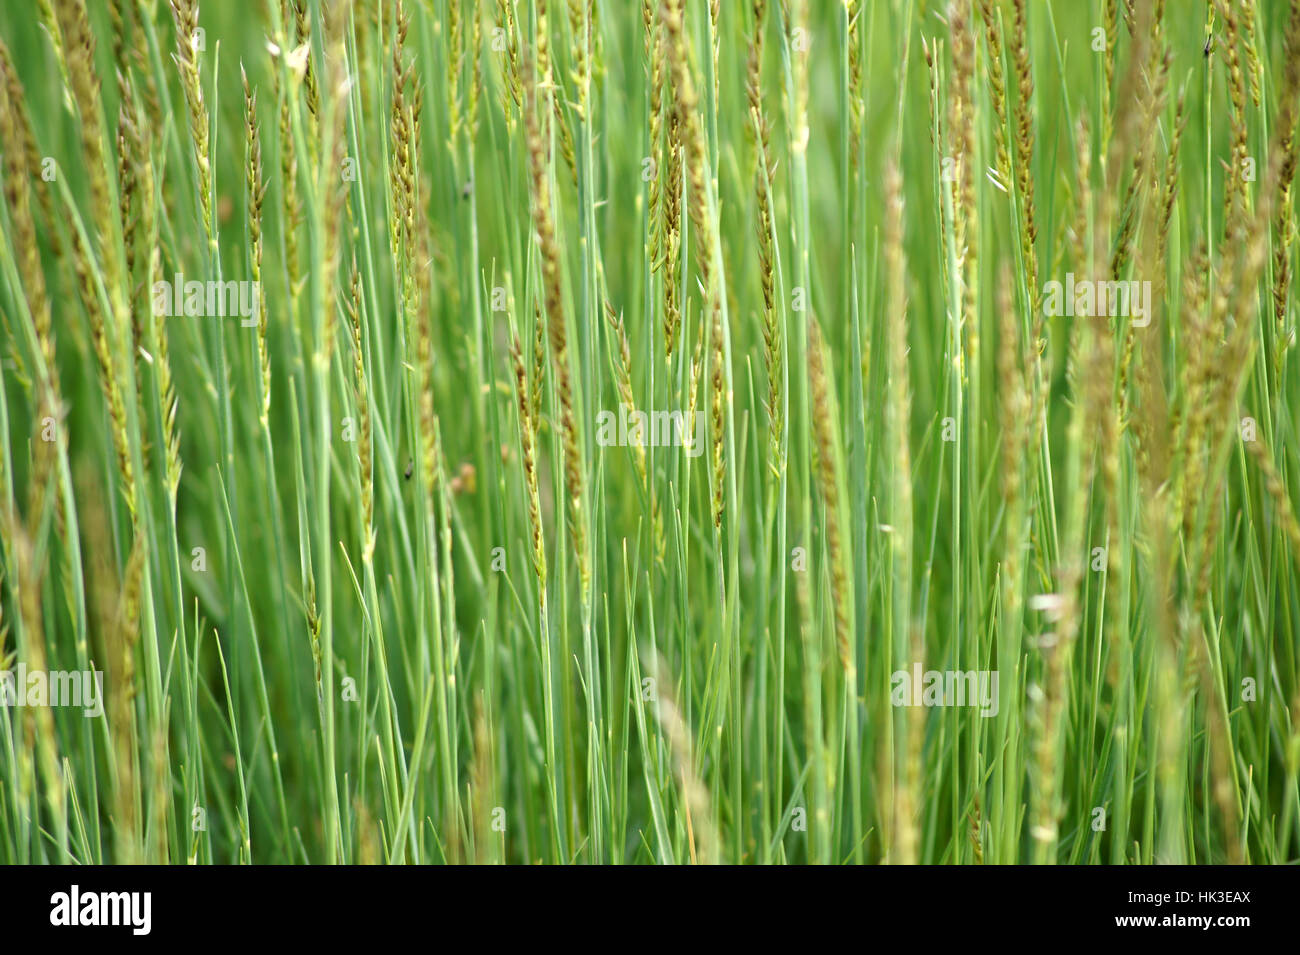 macro, close-up, macro admission, close up view, grasses, juicy, meadow, grass, Stock Photo